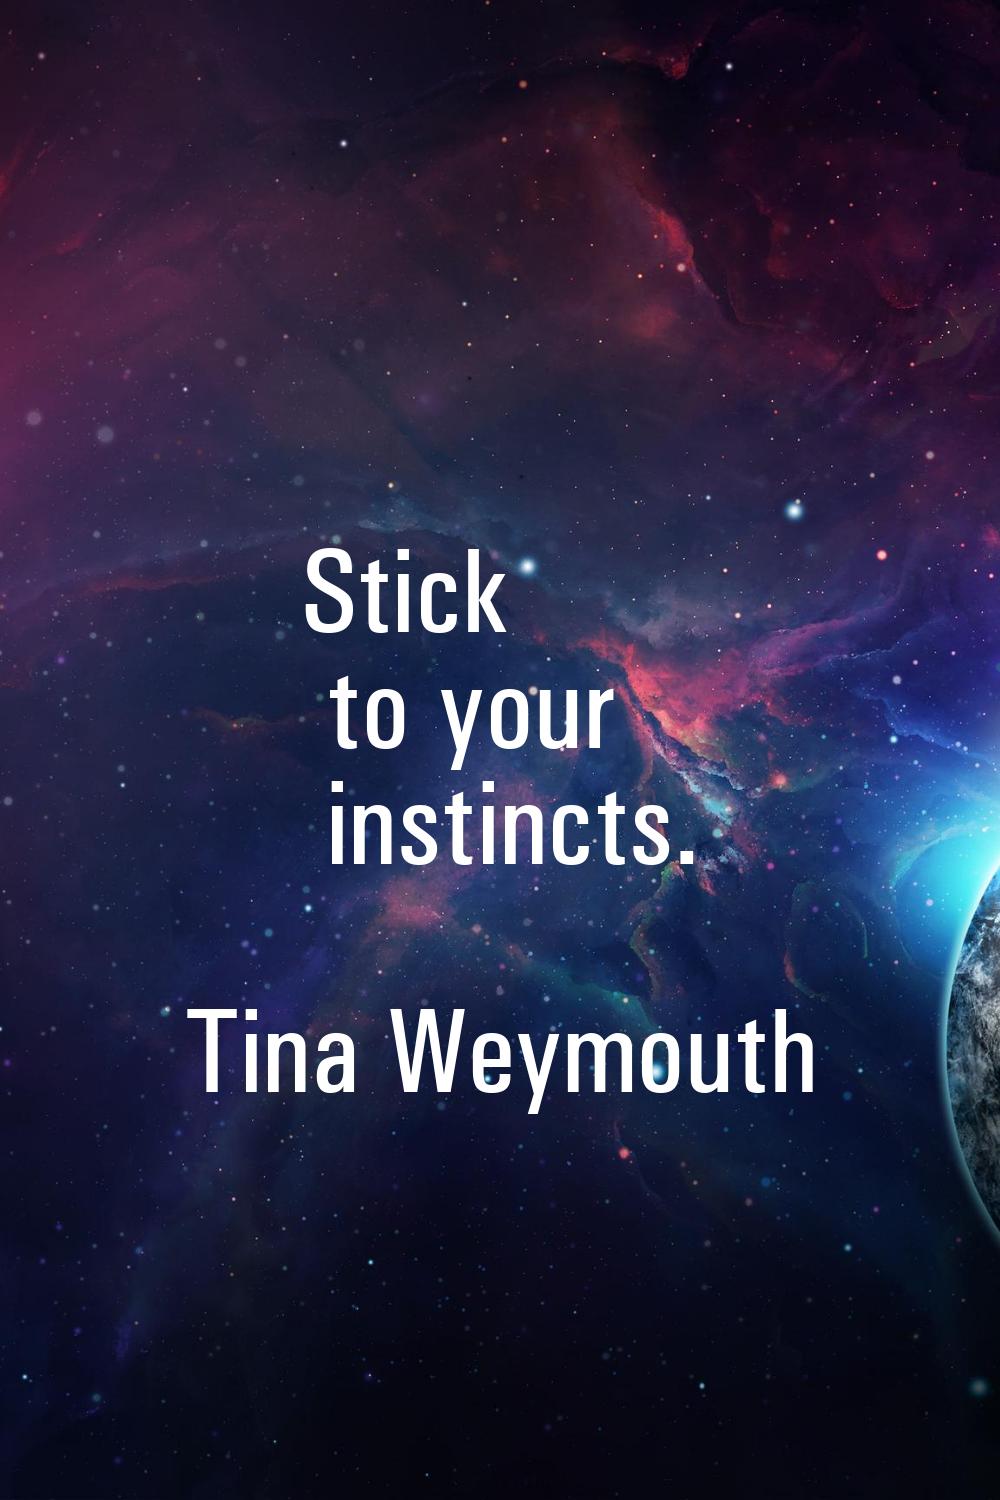 Stick to your instincts.